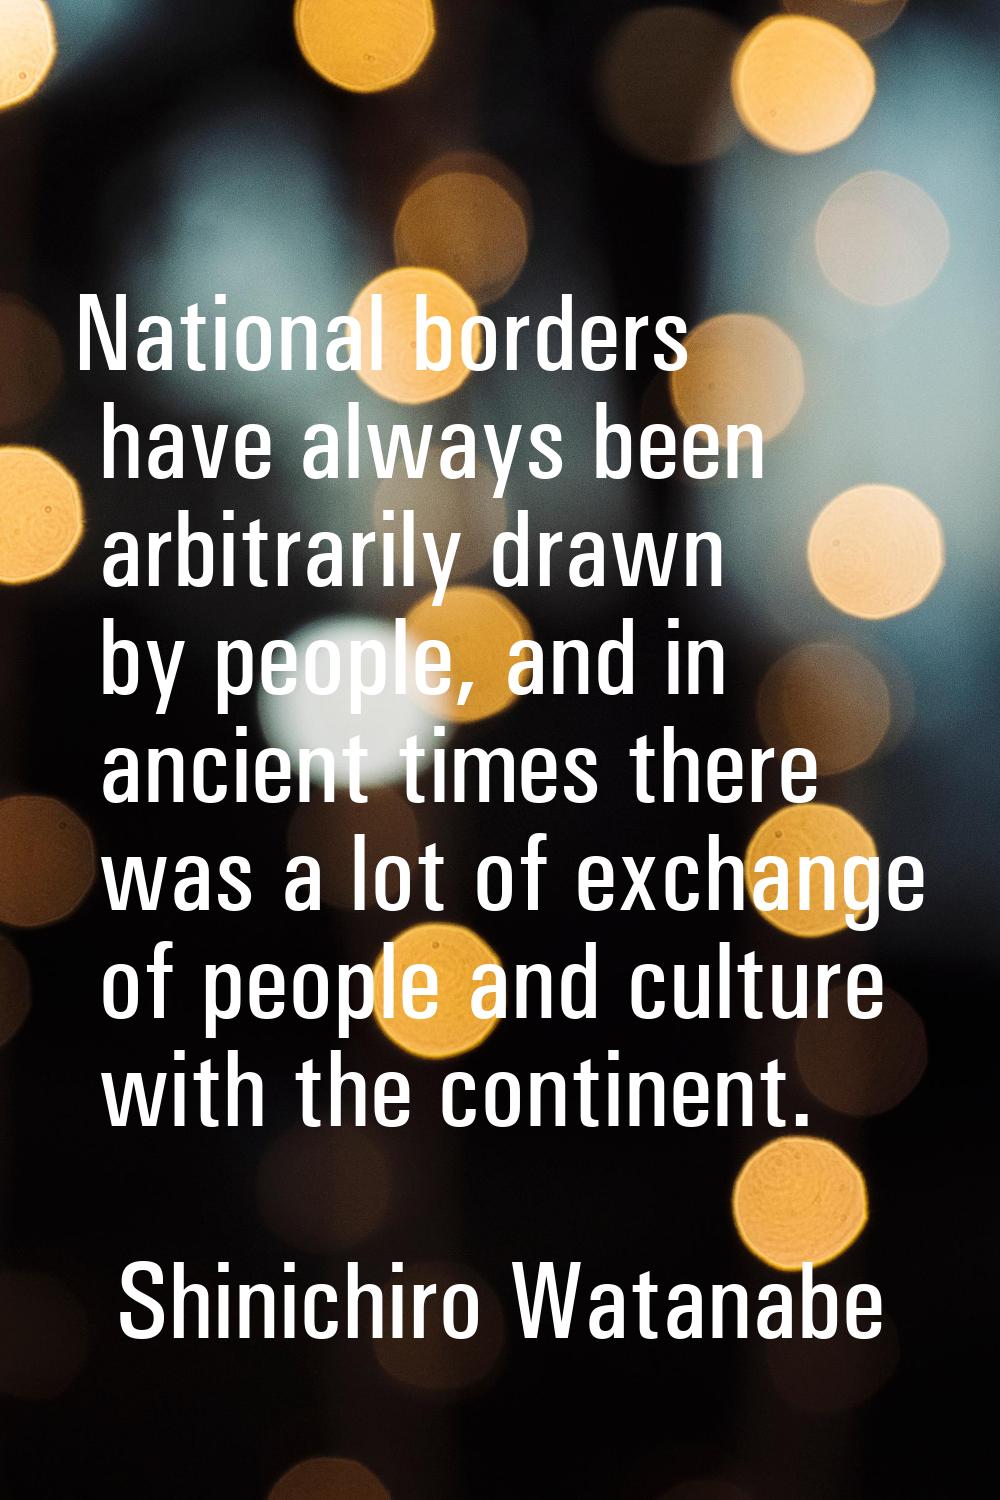 National borders have always been arbitrarily drawn by people, and in ancient times there was a lot